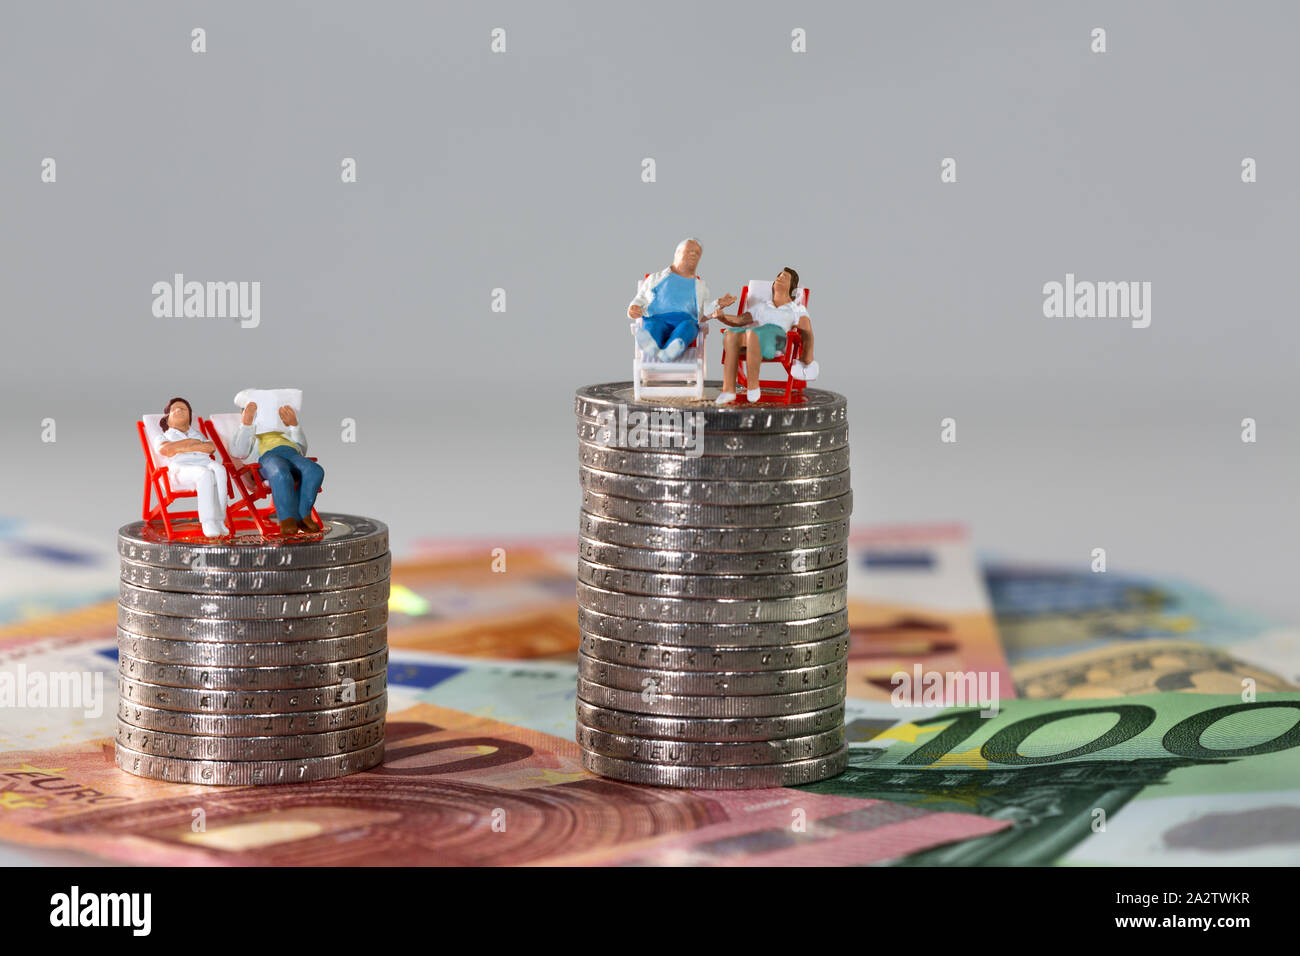 miniature figures representing couples with unequal wealth Stock Photo